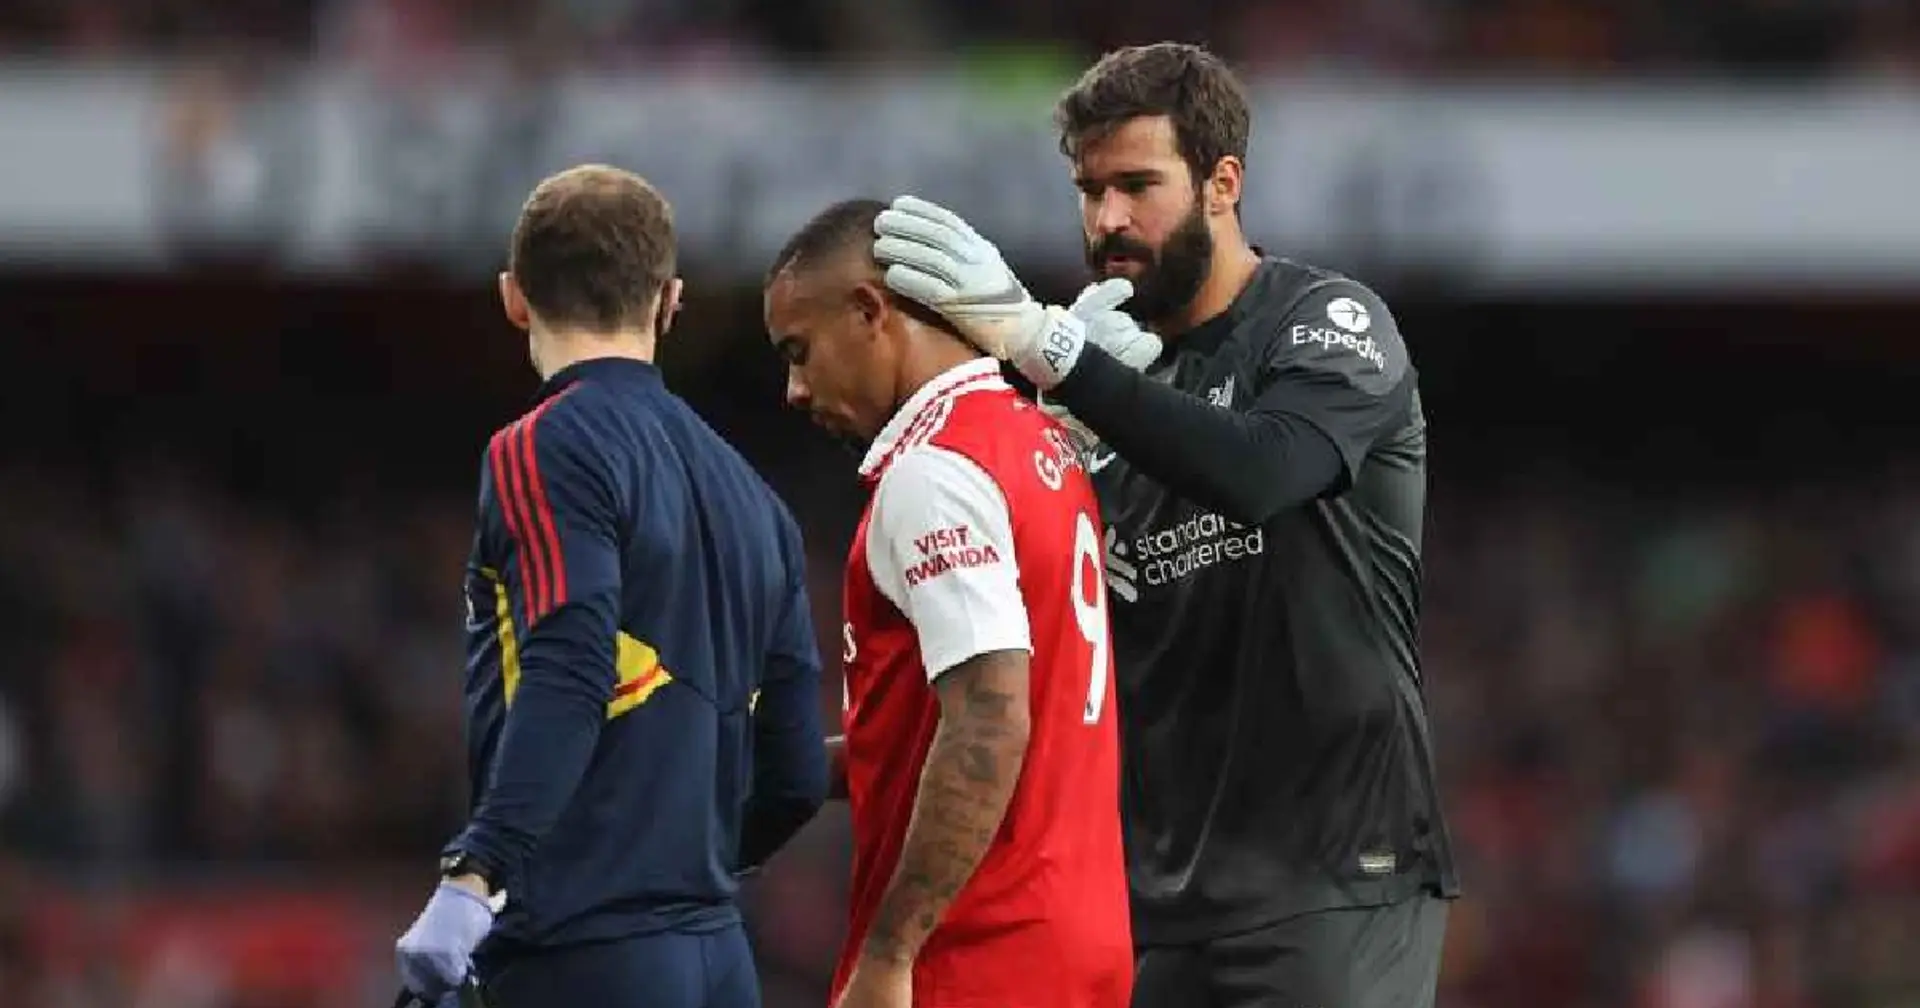 Gabriel Jesus to miss Arsenal's Europa League clash with Bodo/Glimt after head injury